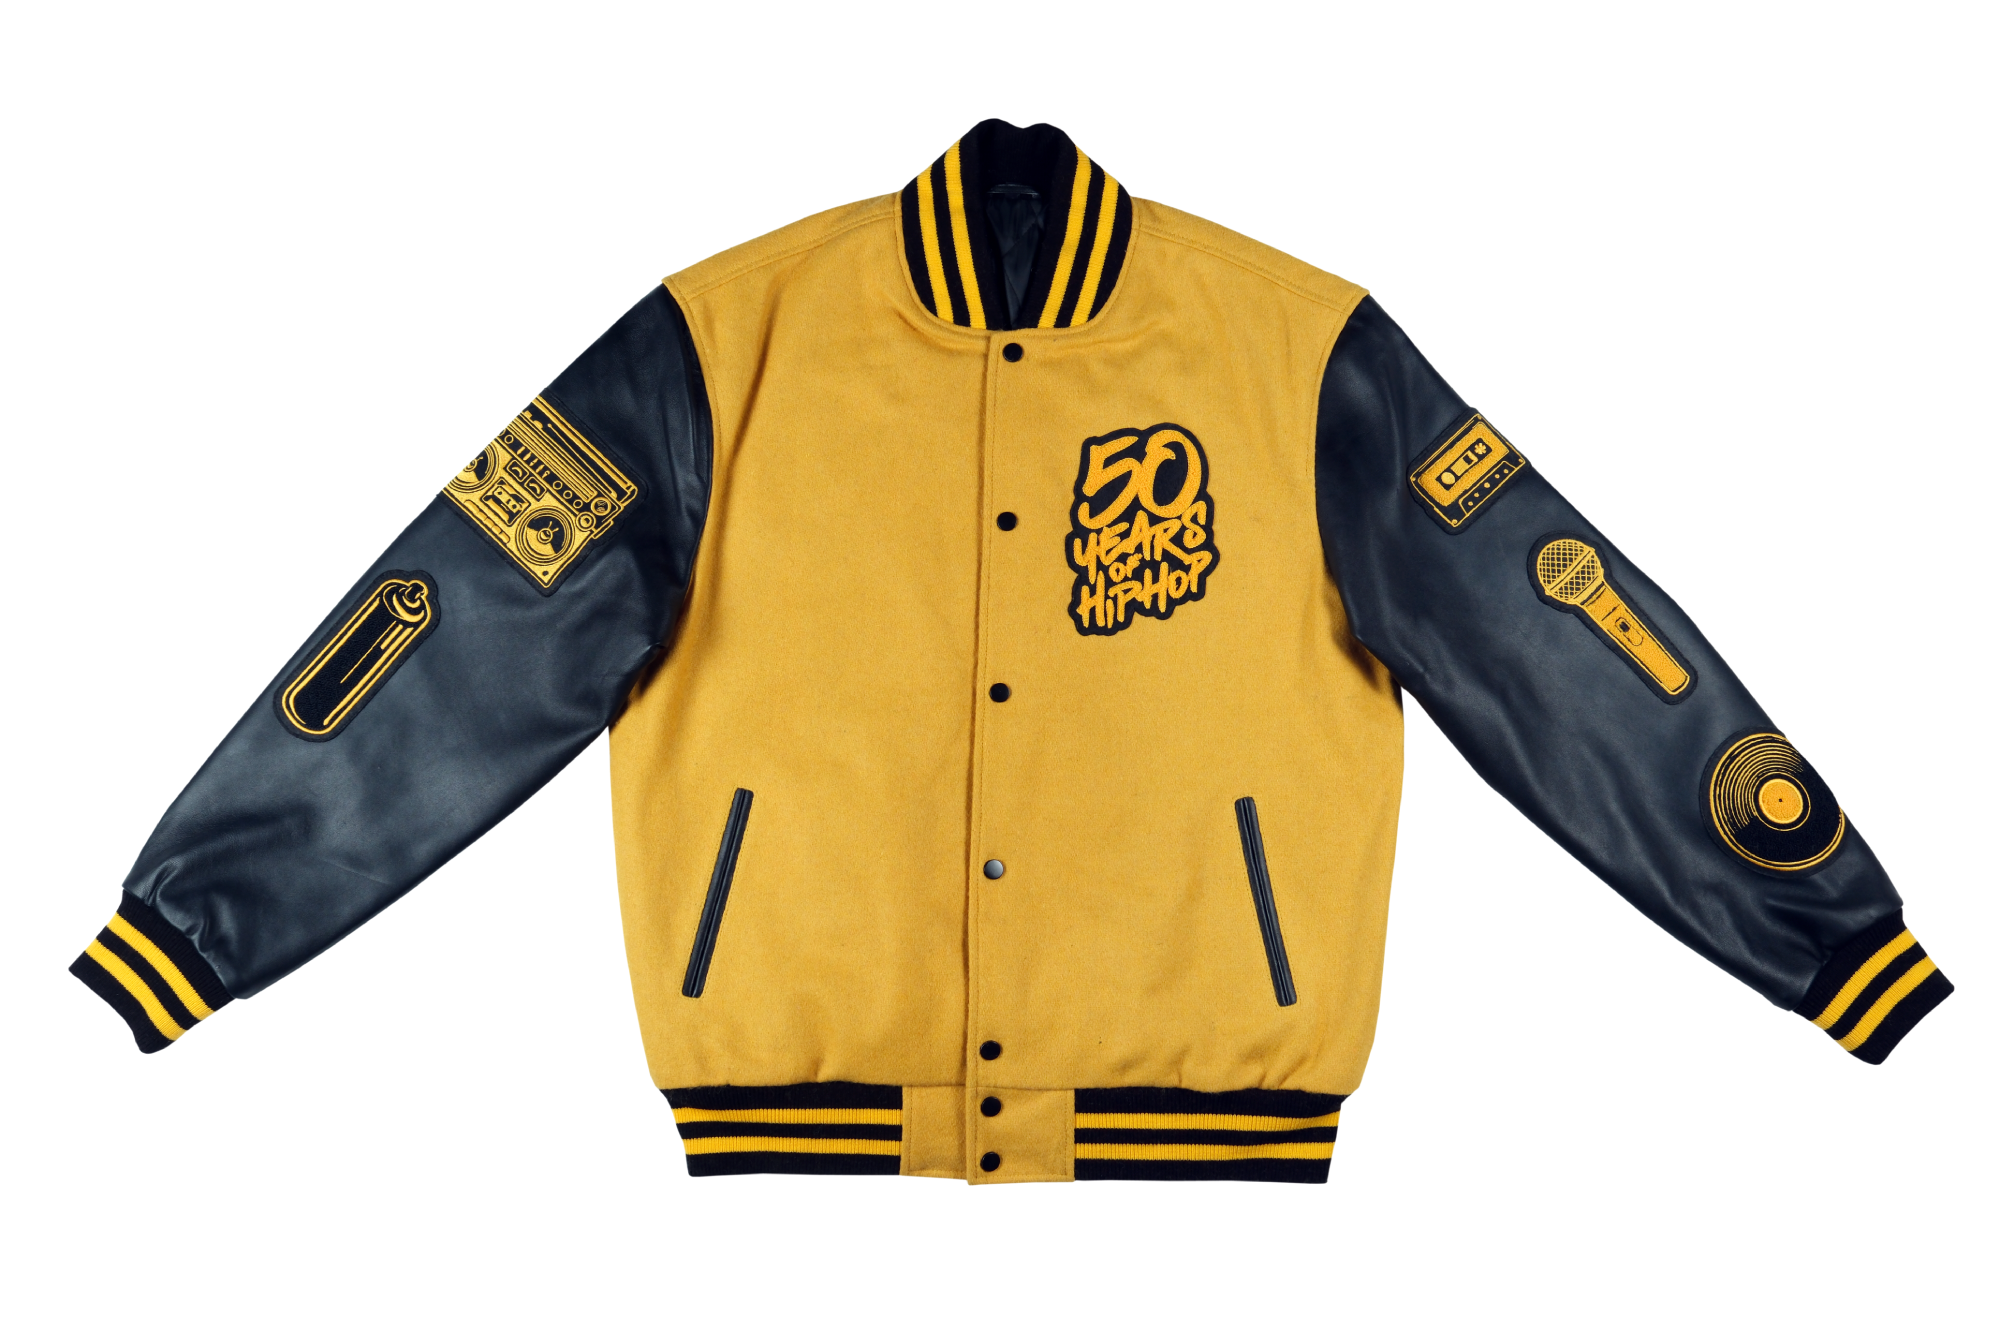 Celebrating 50 Years of Hip Hop: Vintage Yellow Leather and Wool Varsity Jacket